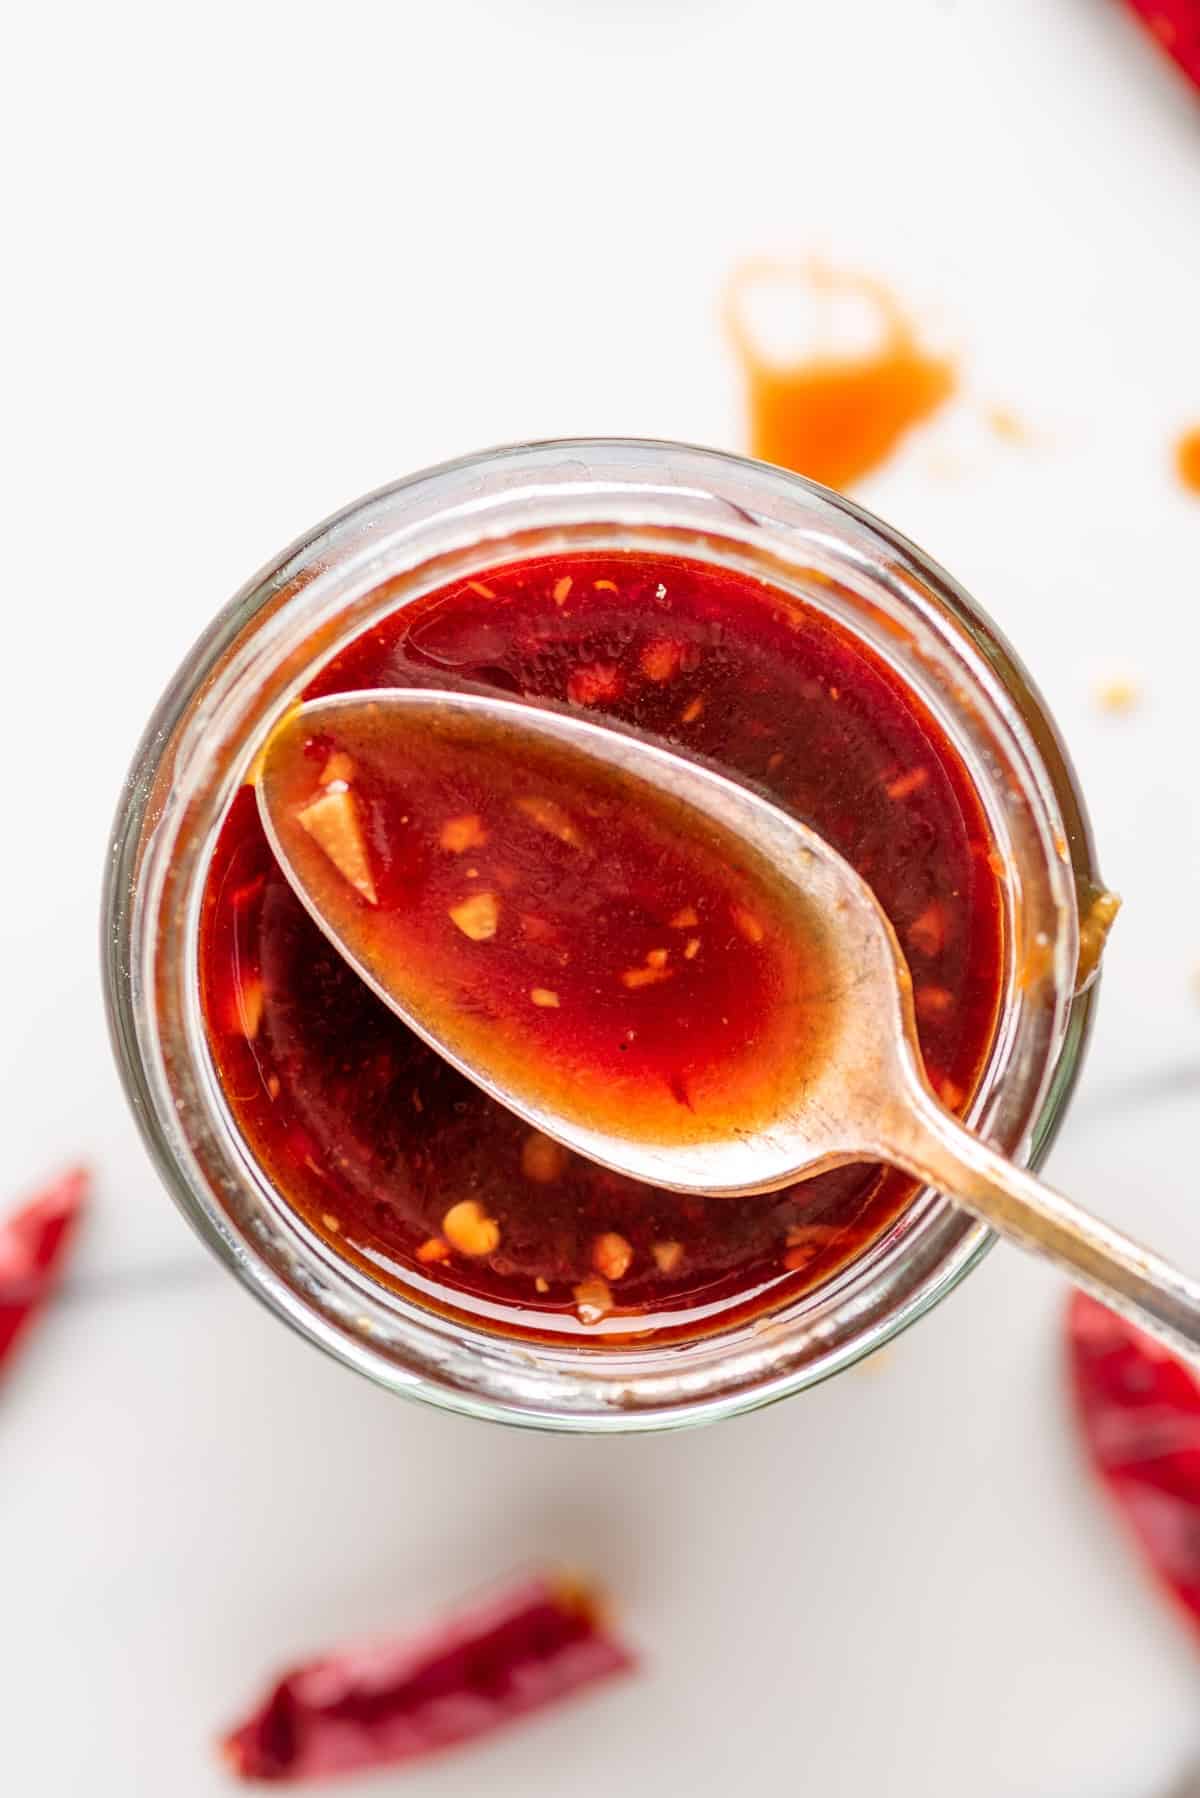 keto sweet chili sauce made with xanthan gum